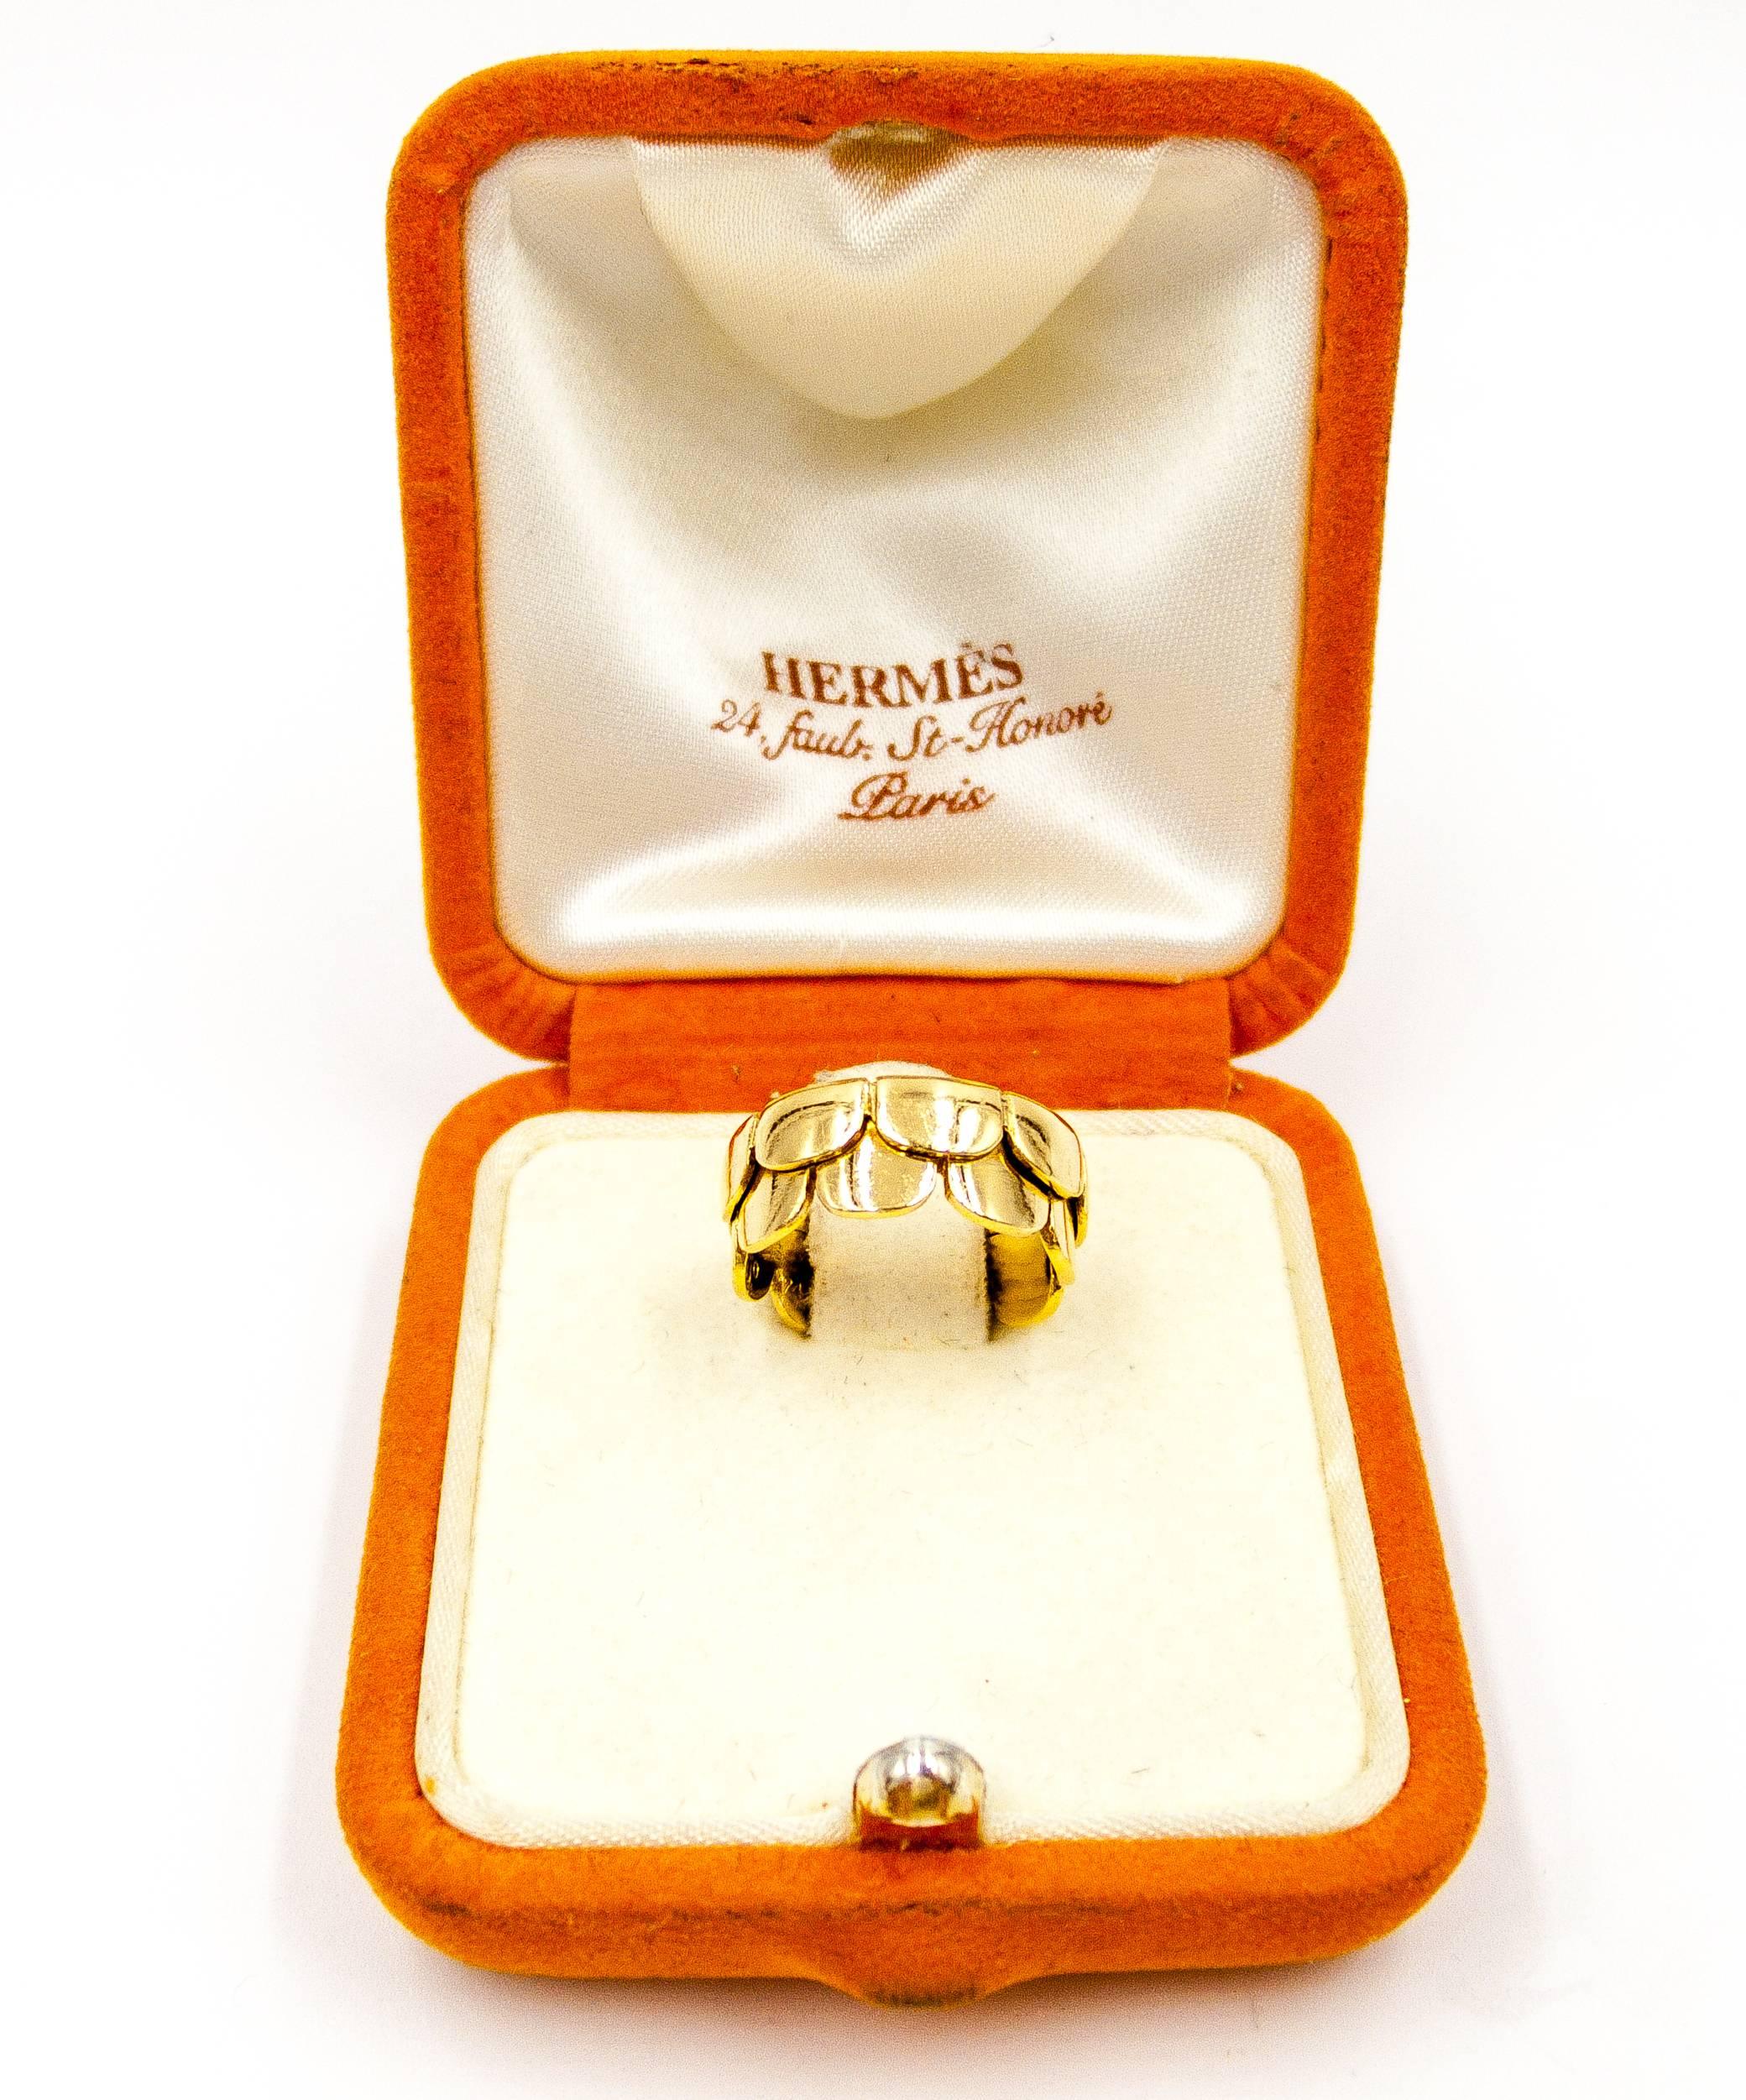 Perennially elegant and timeless, Hermes jewels display fine quality workmanship and inimitable French style in every item.   This lovely little ring consists of two rows of 18 karat gold scallops, to be worn facing in either direction.  Signed